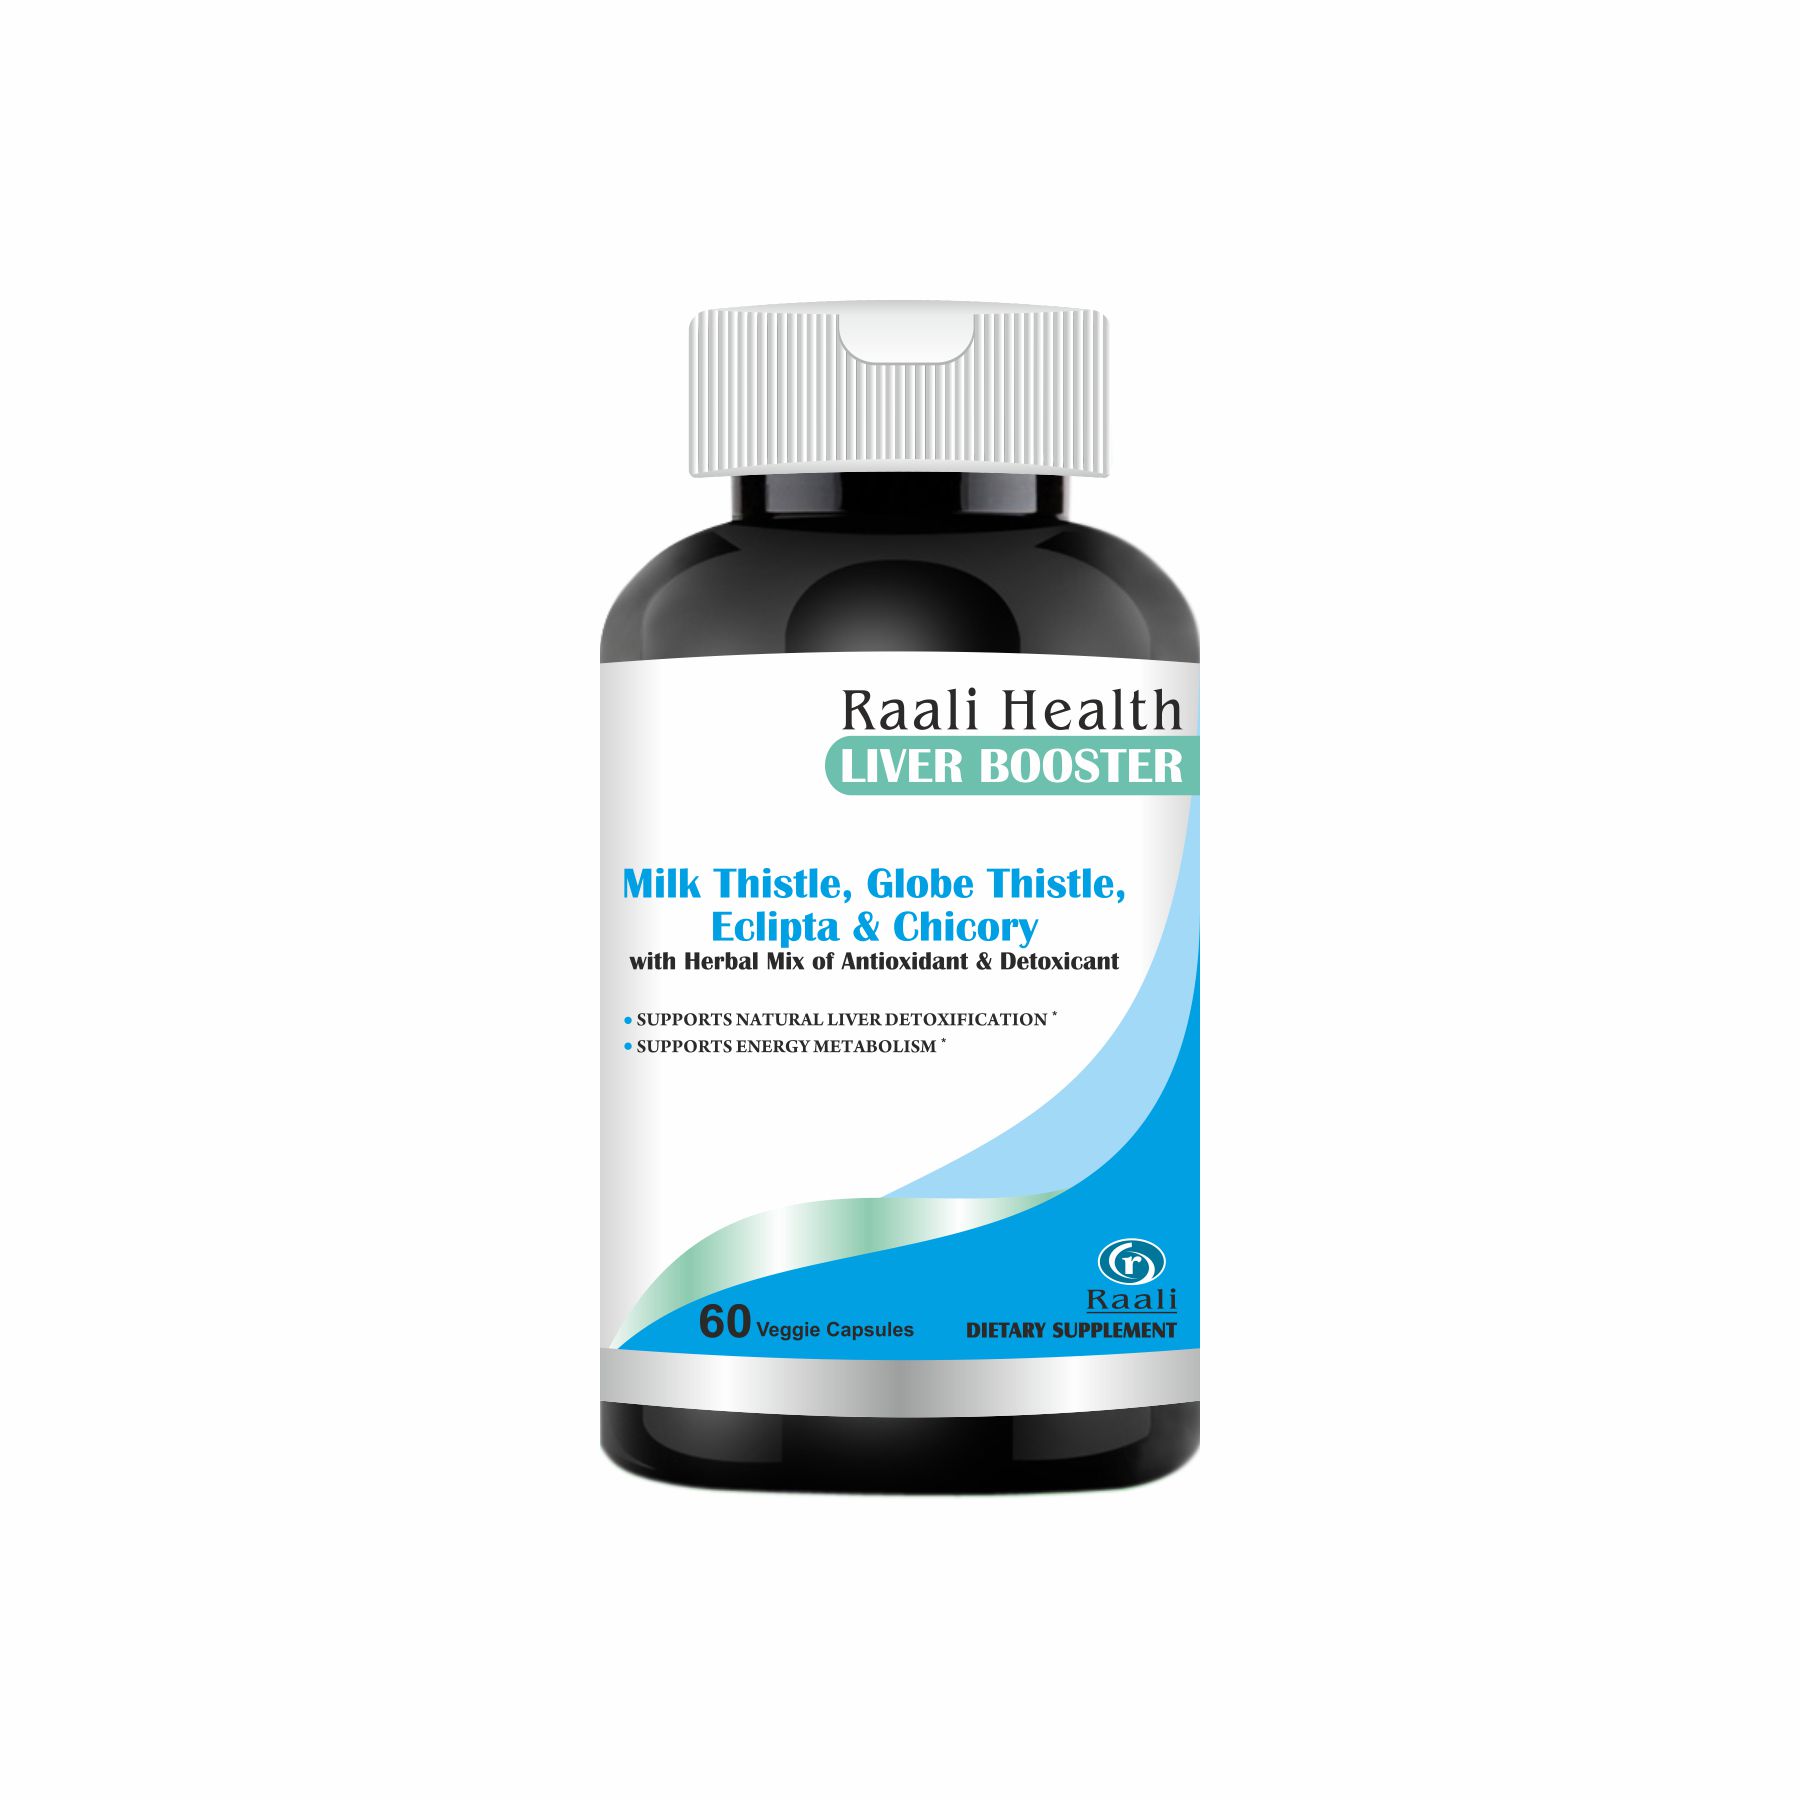 Milk thistle Globe thistle Eclipta, chicory, liver booster, antioxidant, energy and metabolism